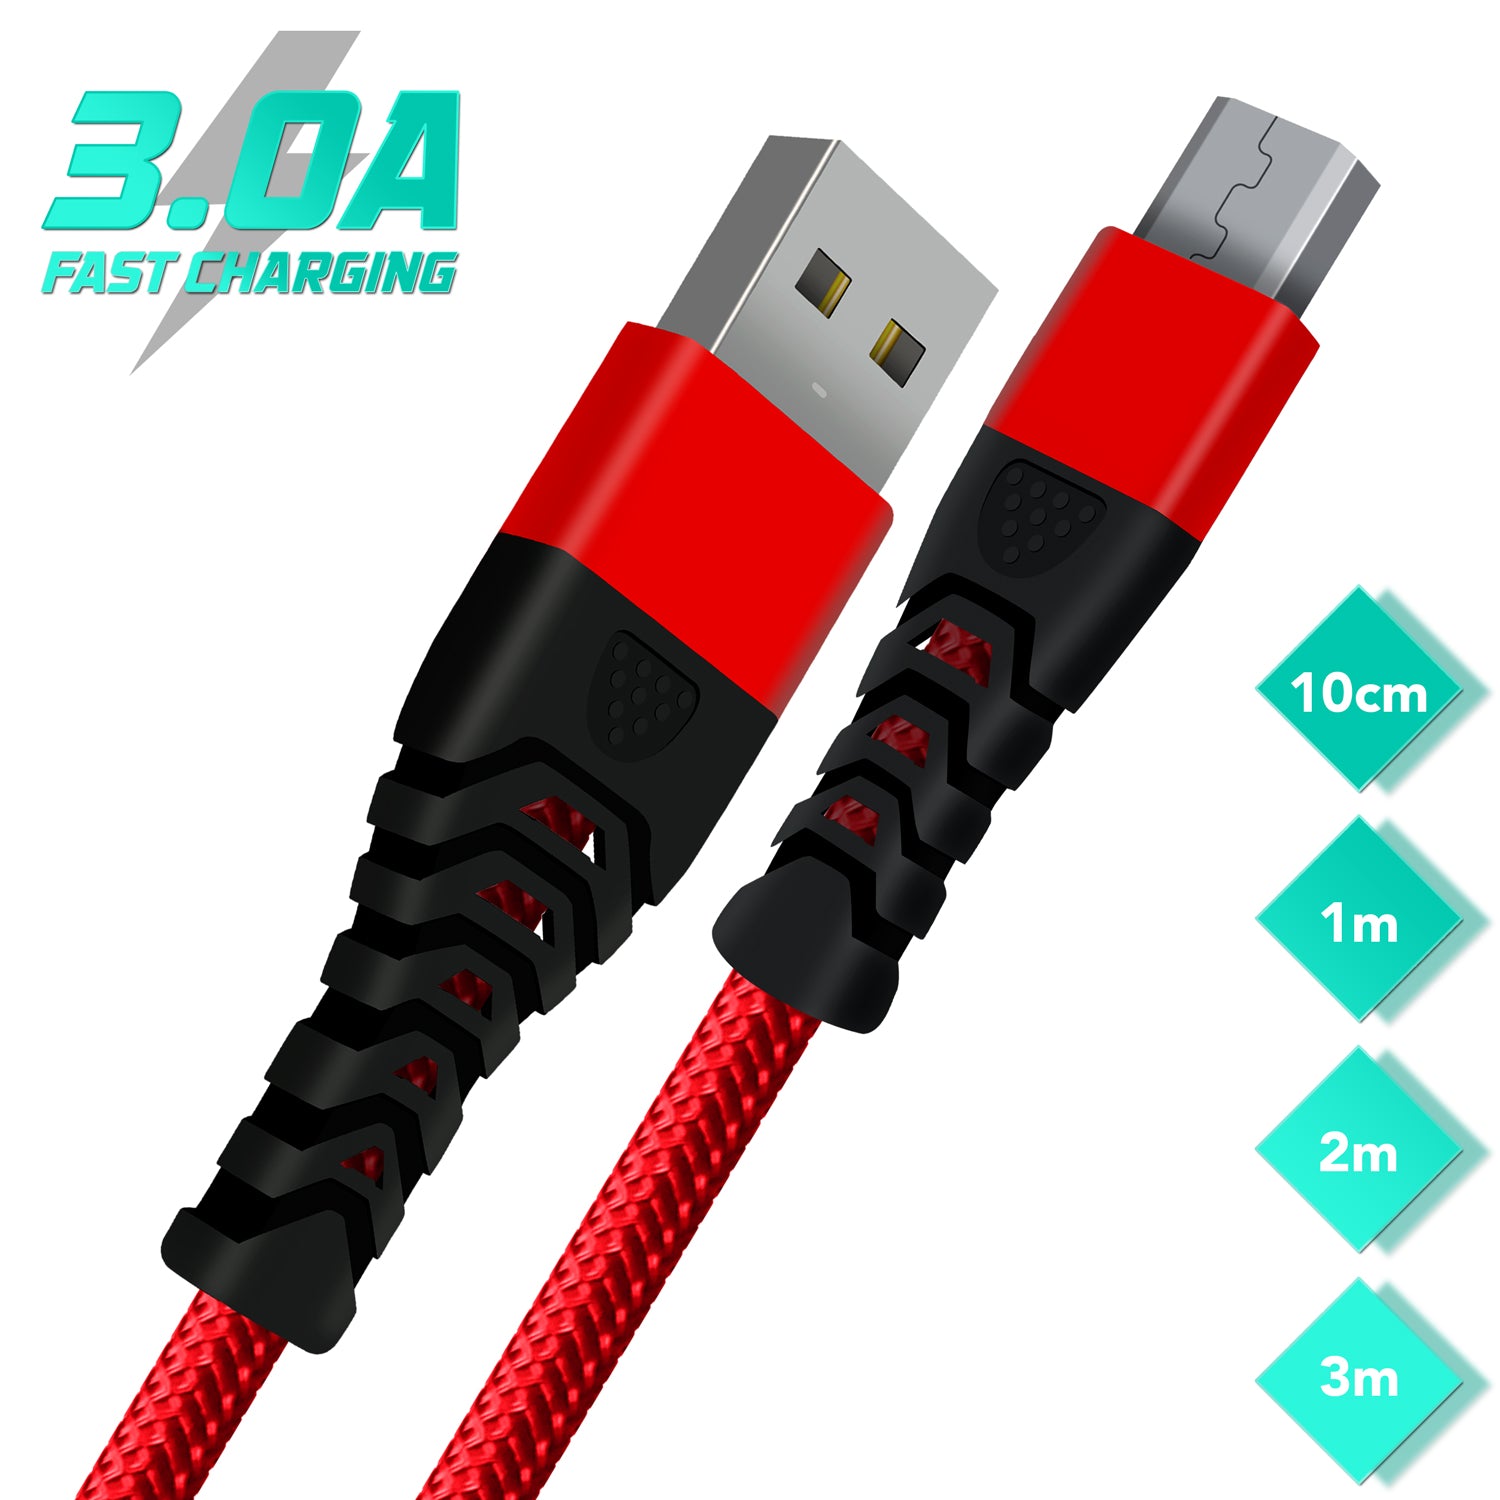 Heavy-Duty Micro USB Cable - USB 3.0 A to Micro B Fast Data and Charging Cable